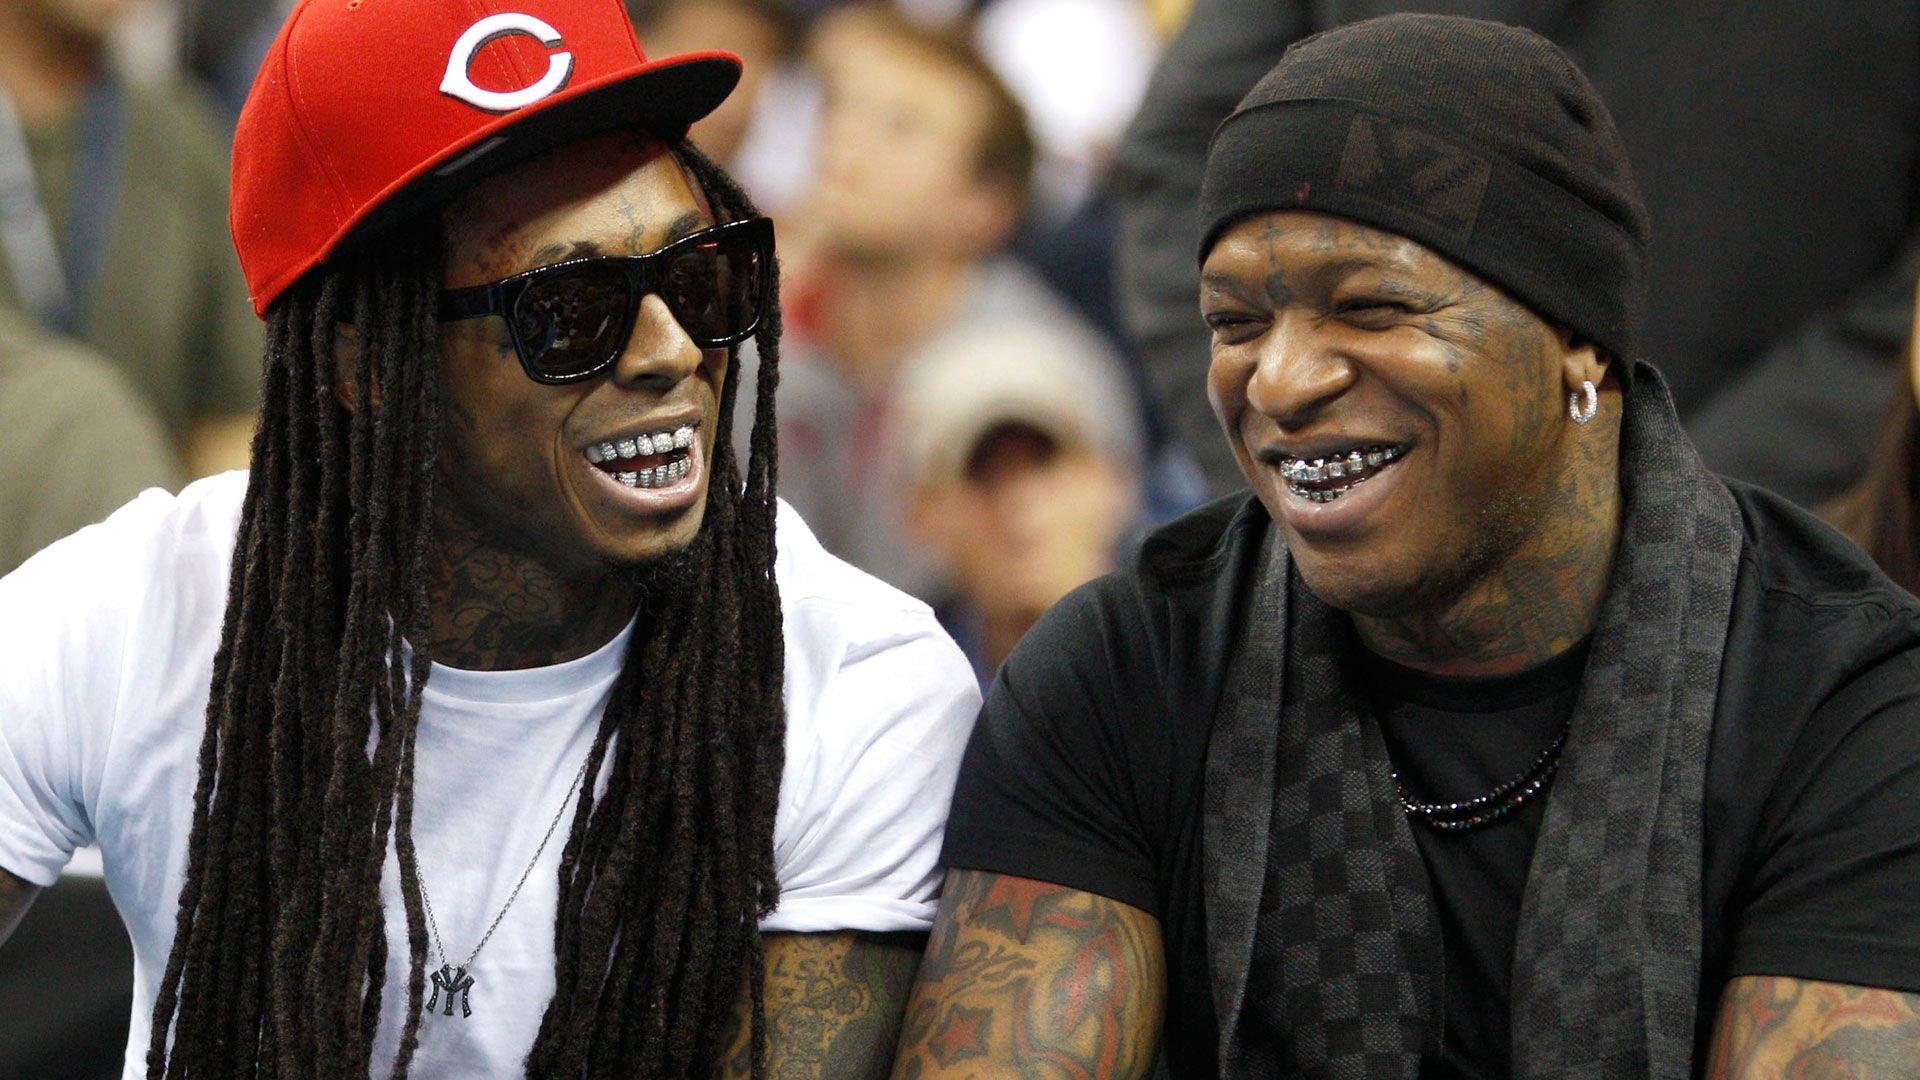 Lil Wayne's Lawsuit Against Universal Music Group On Hold Until He